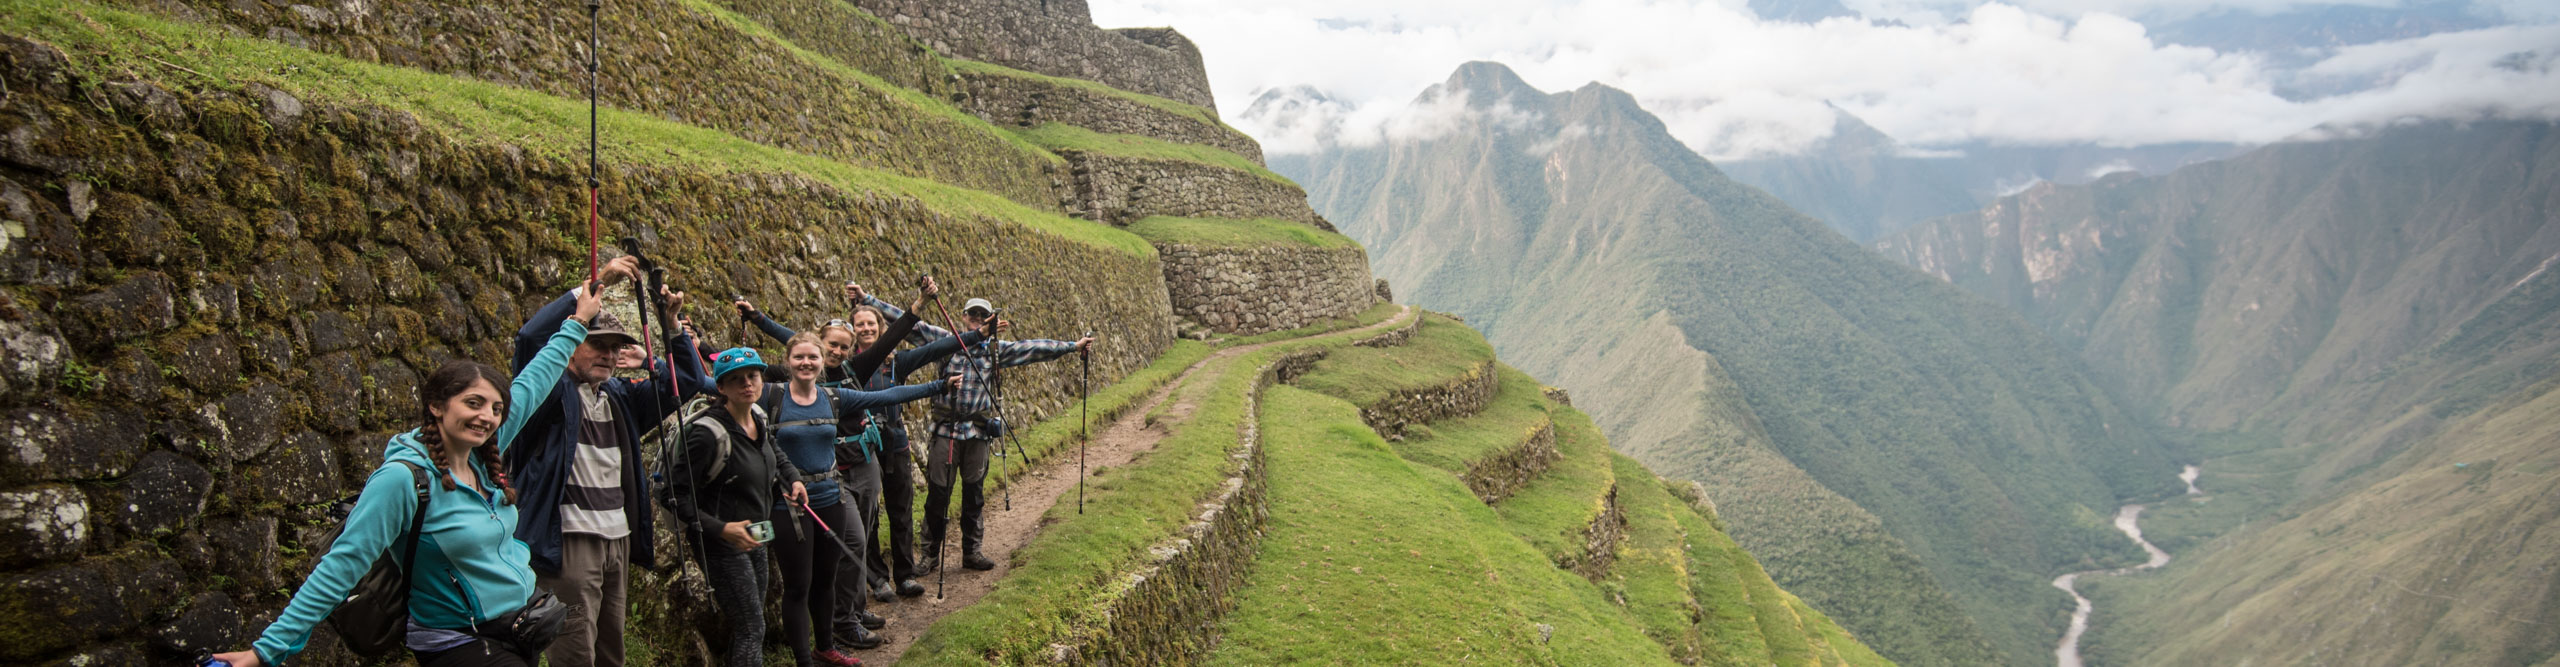 Machu Picchu trekkers posing for a photos in the green mountains